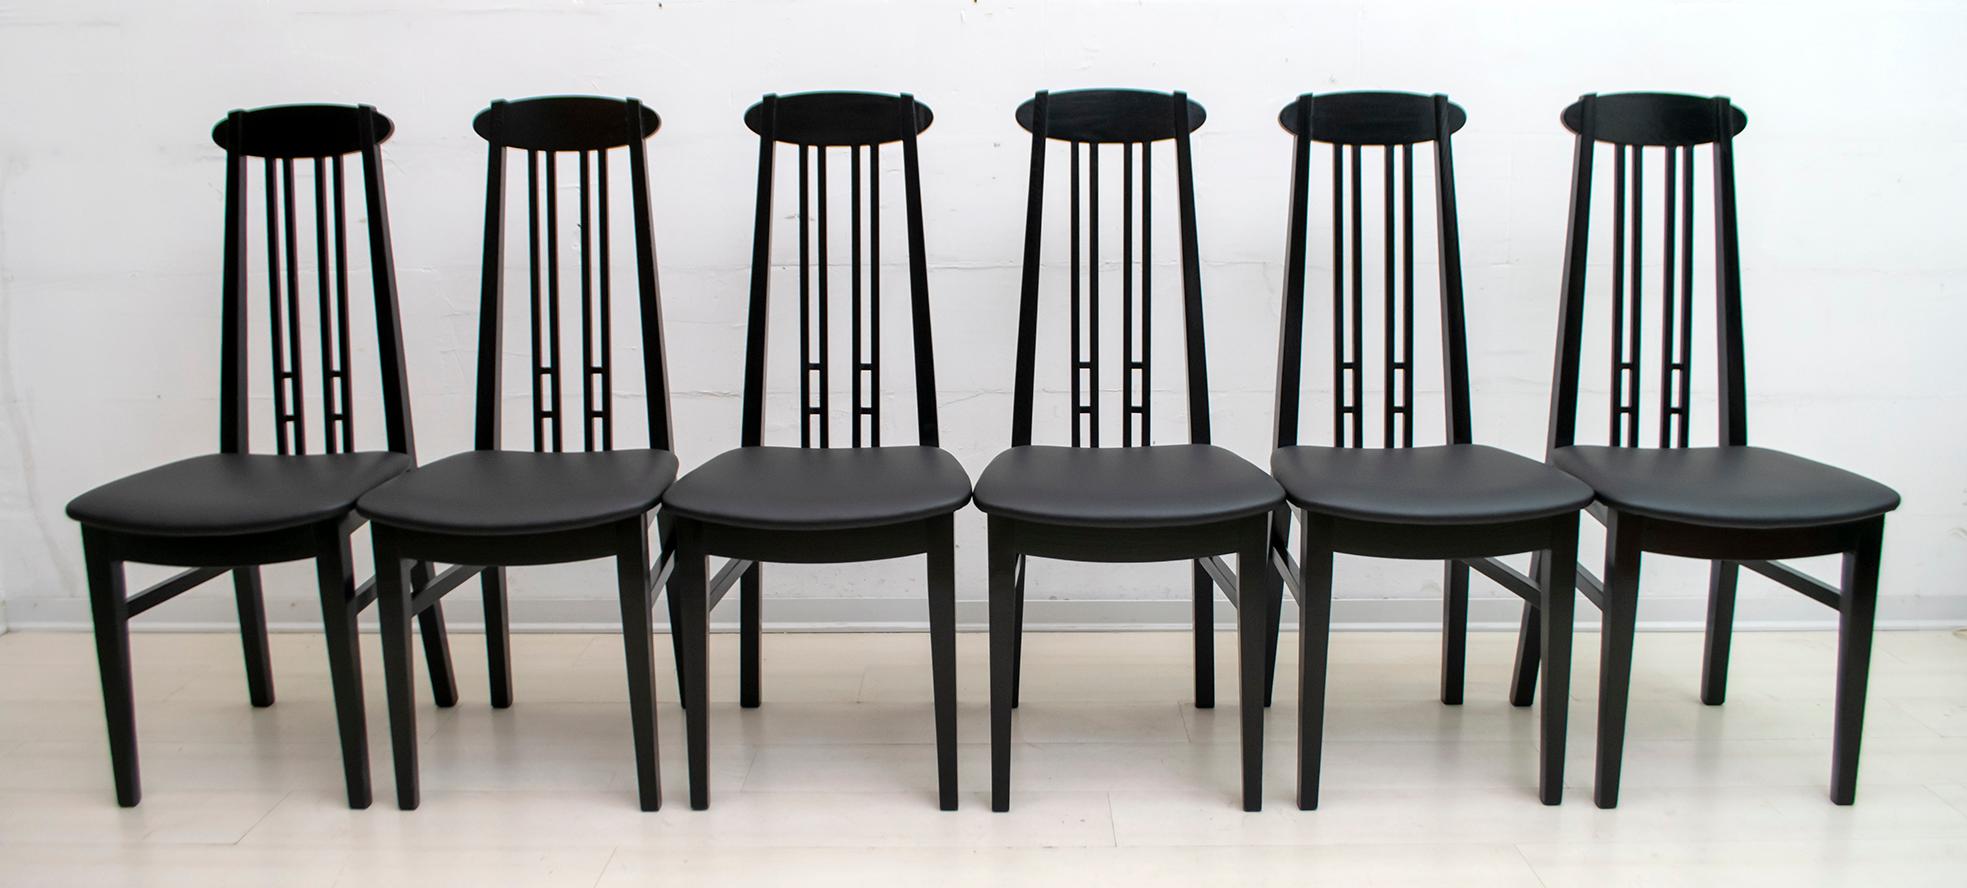 Art Nouveau After Charles Rennie Mackintosh 6 Black Lacquered High-Backed Chairs, 1979